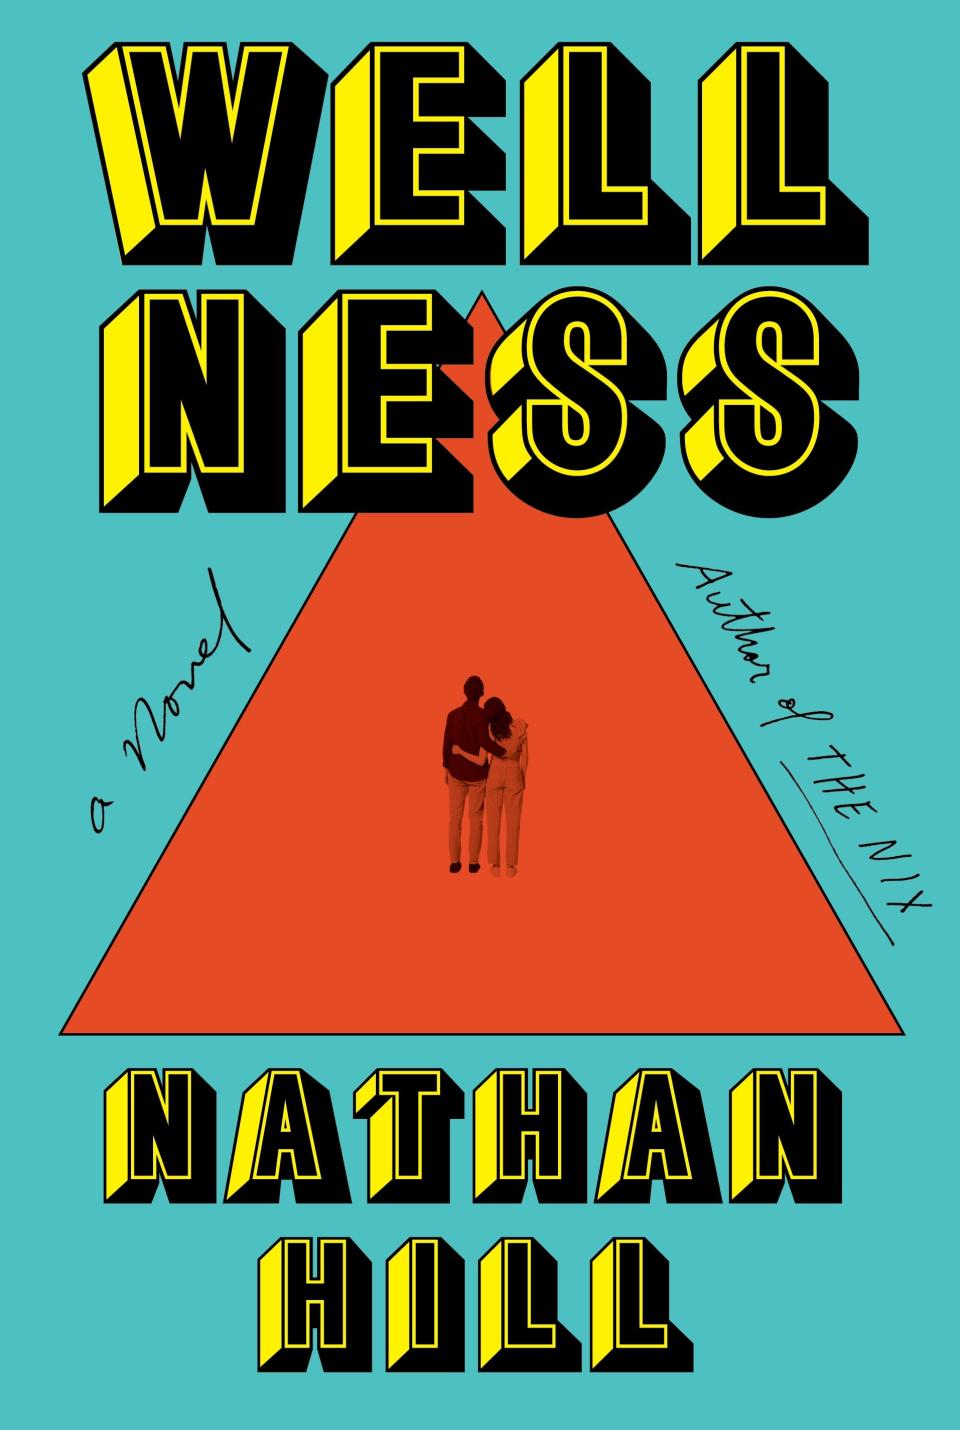 "Wellness" by Nathan Hill